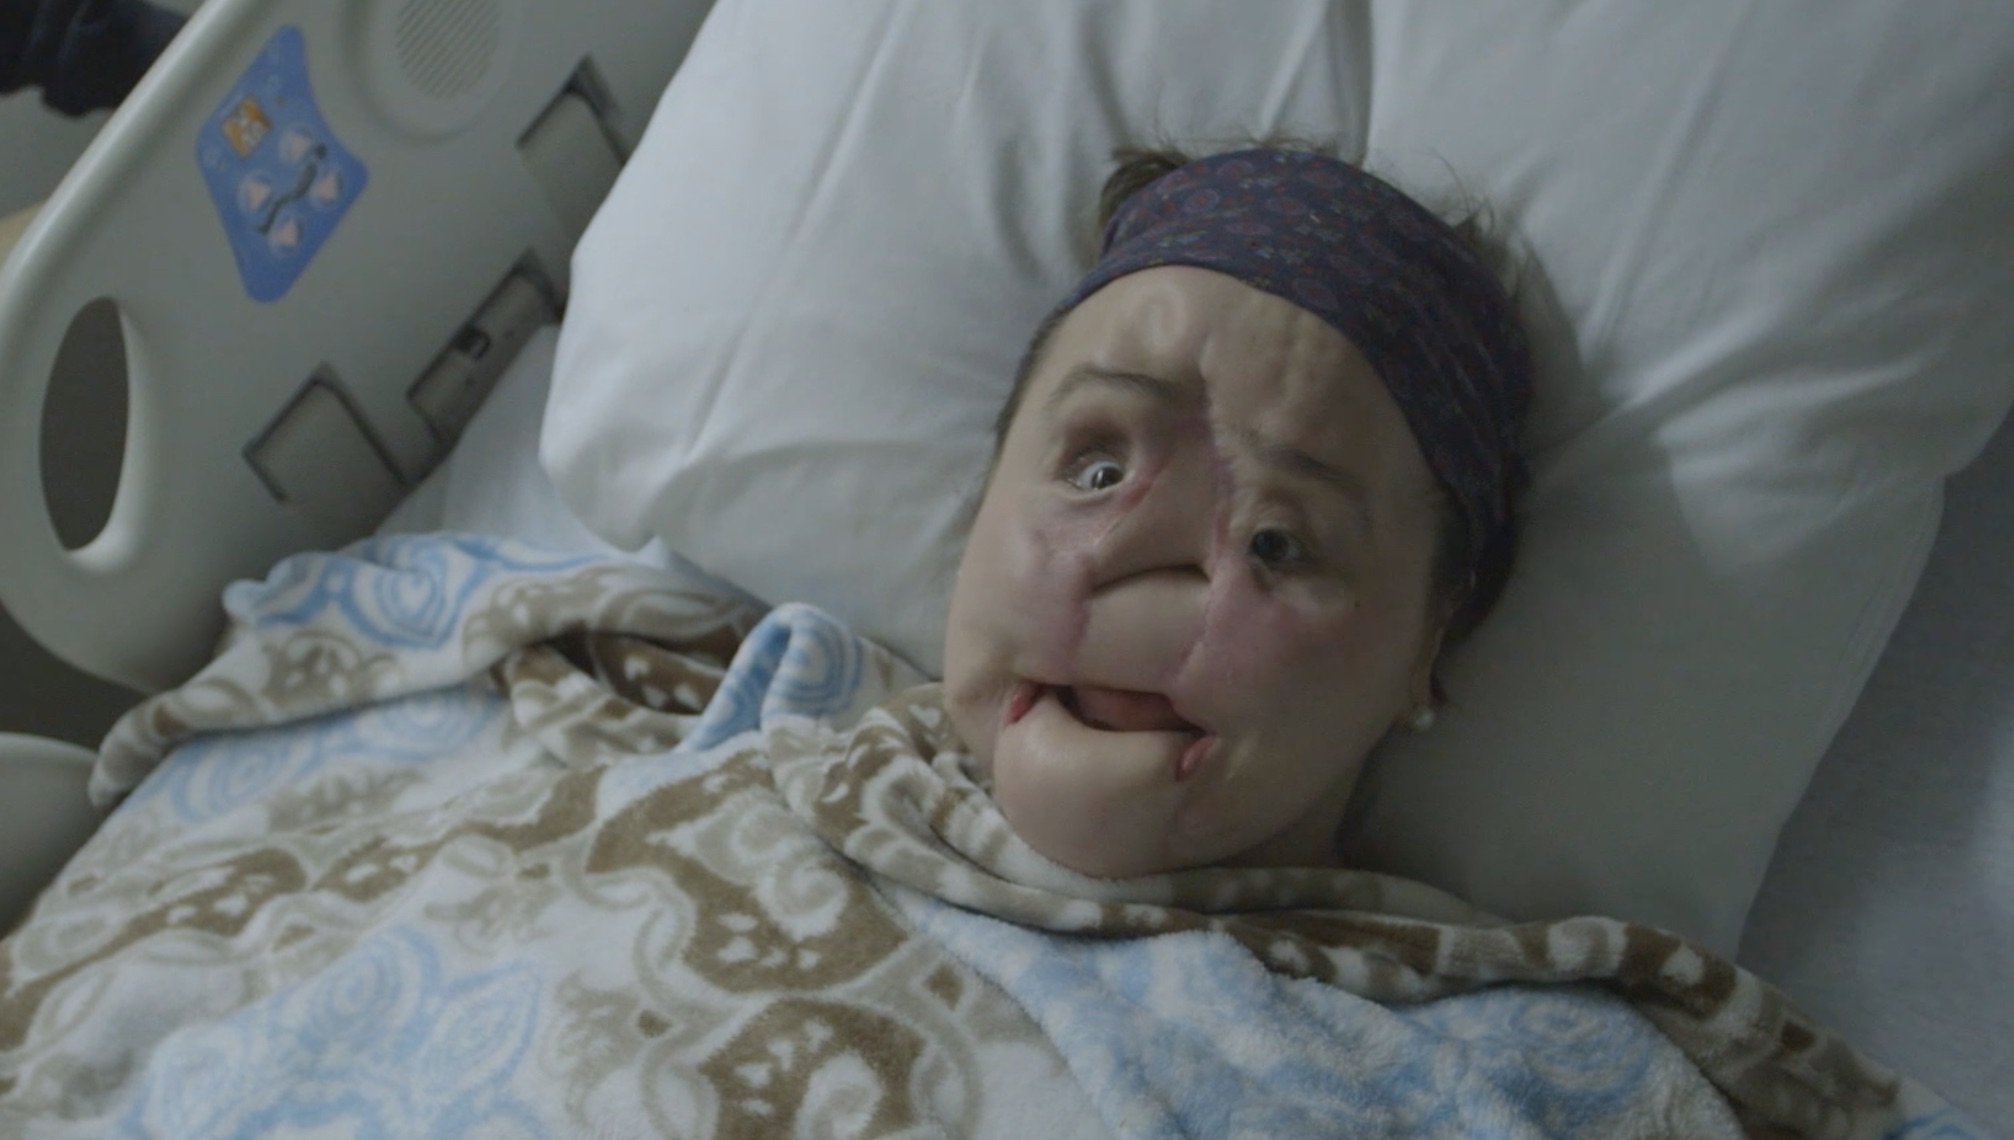 2014px x 1140px - An Unprecedented Look at a Young Woman's Face Transplant